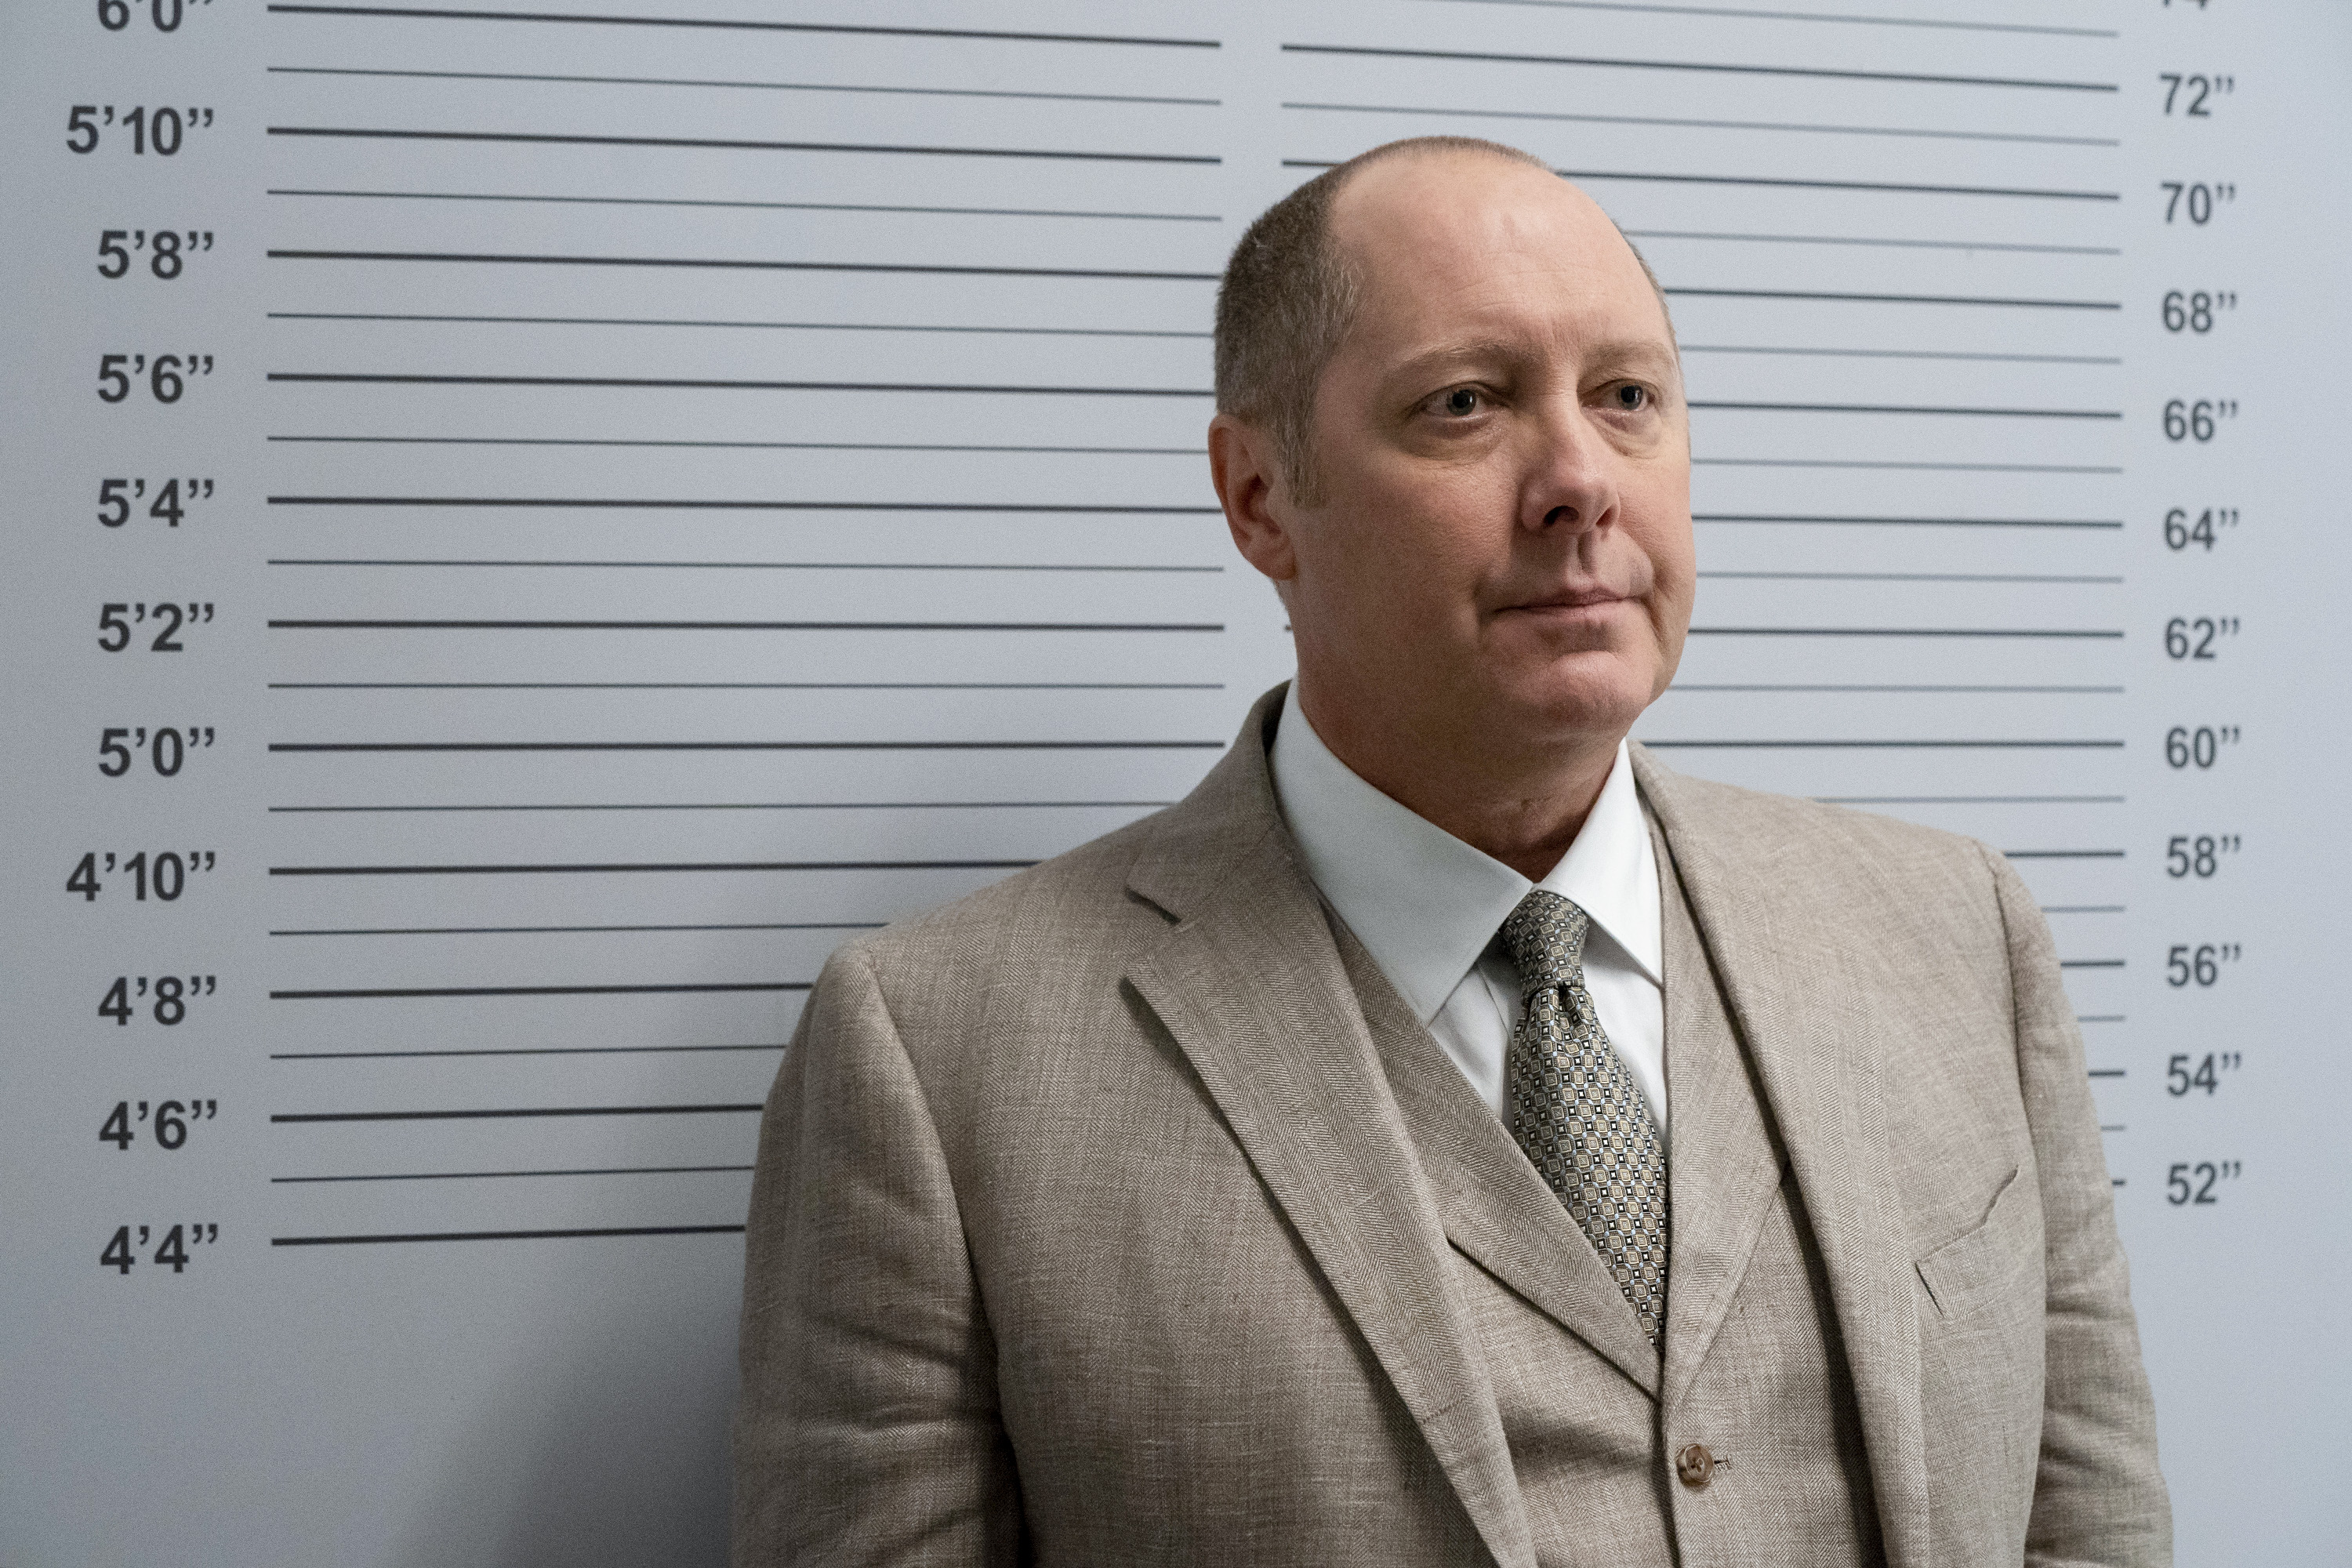 The Blacklist star James Spader, in character as Red, wears